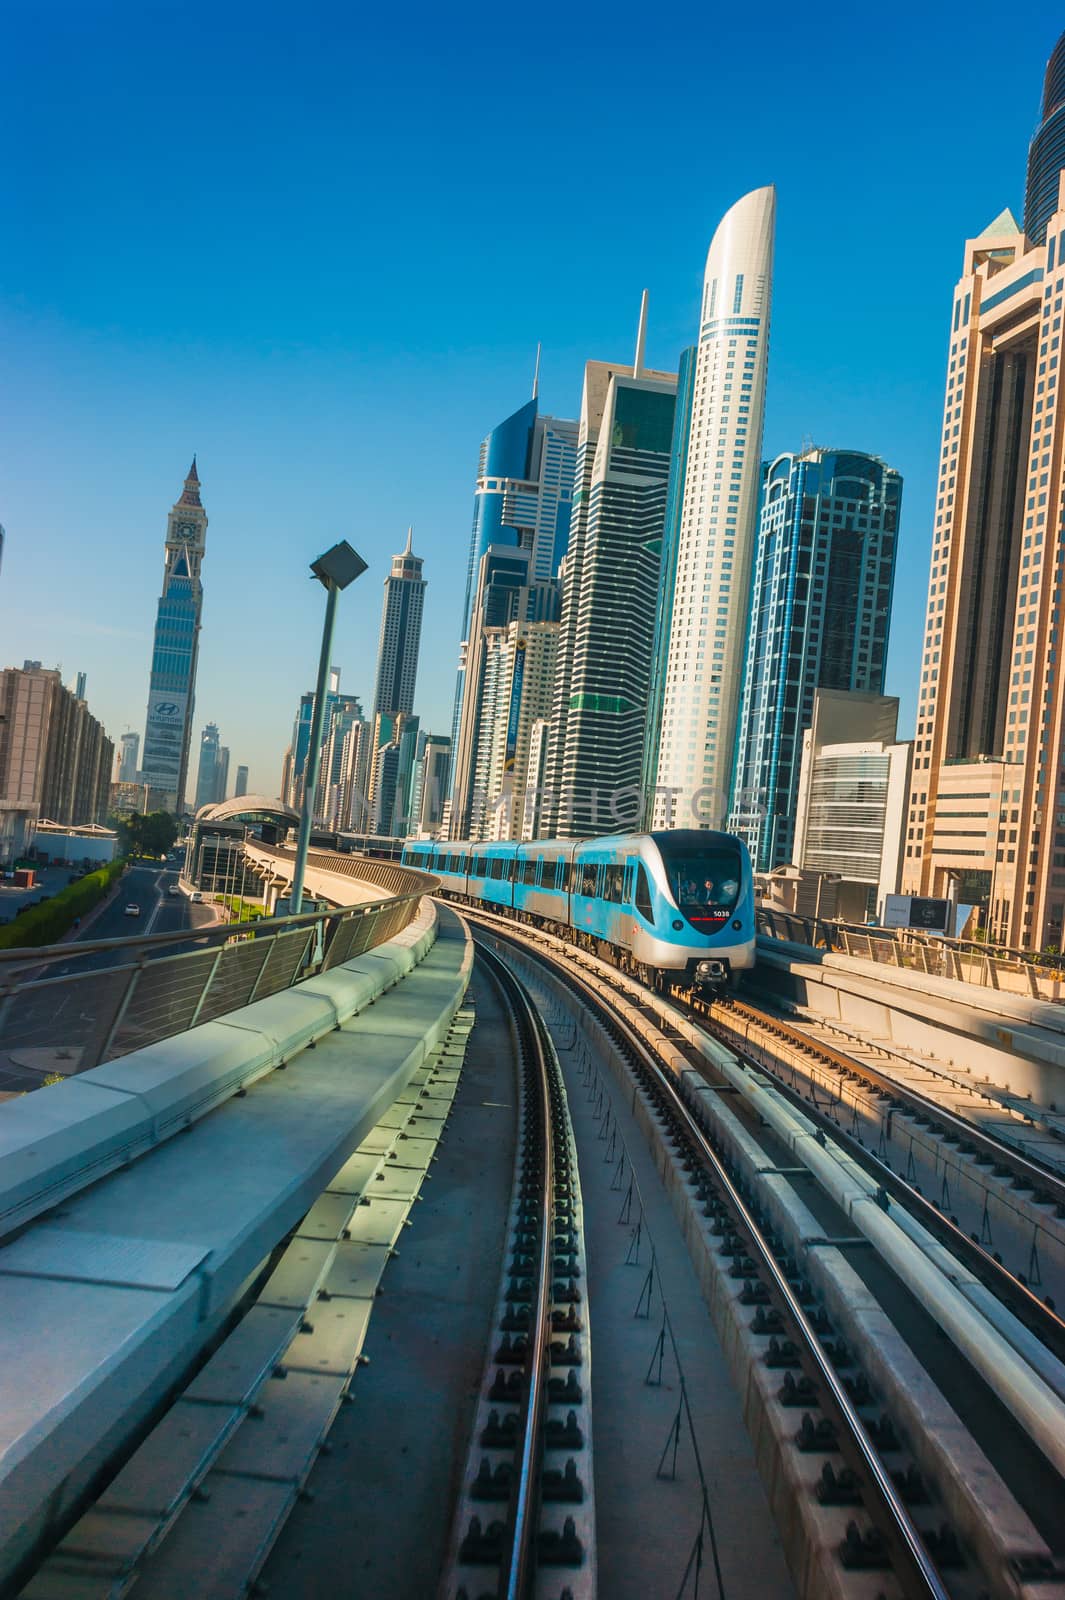 Dubai Metro. A view of the city from the subway car by oleg_zhukov